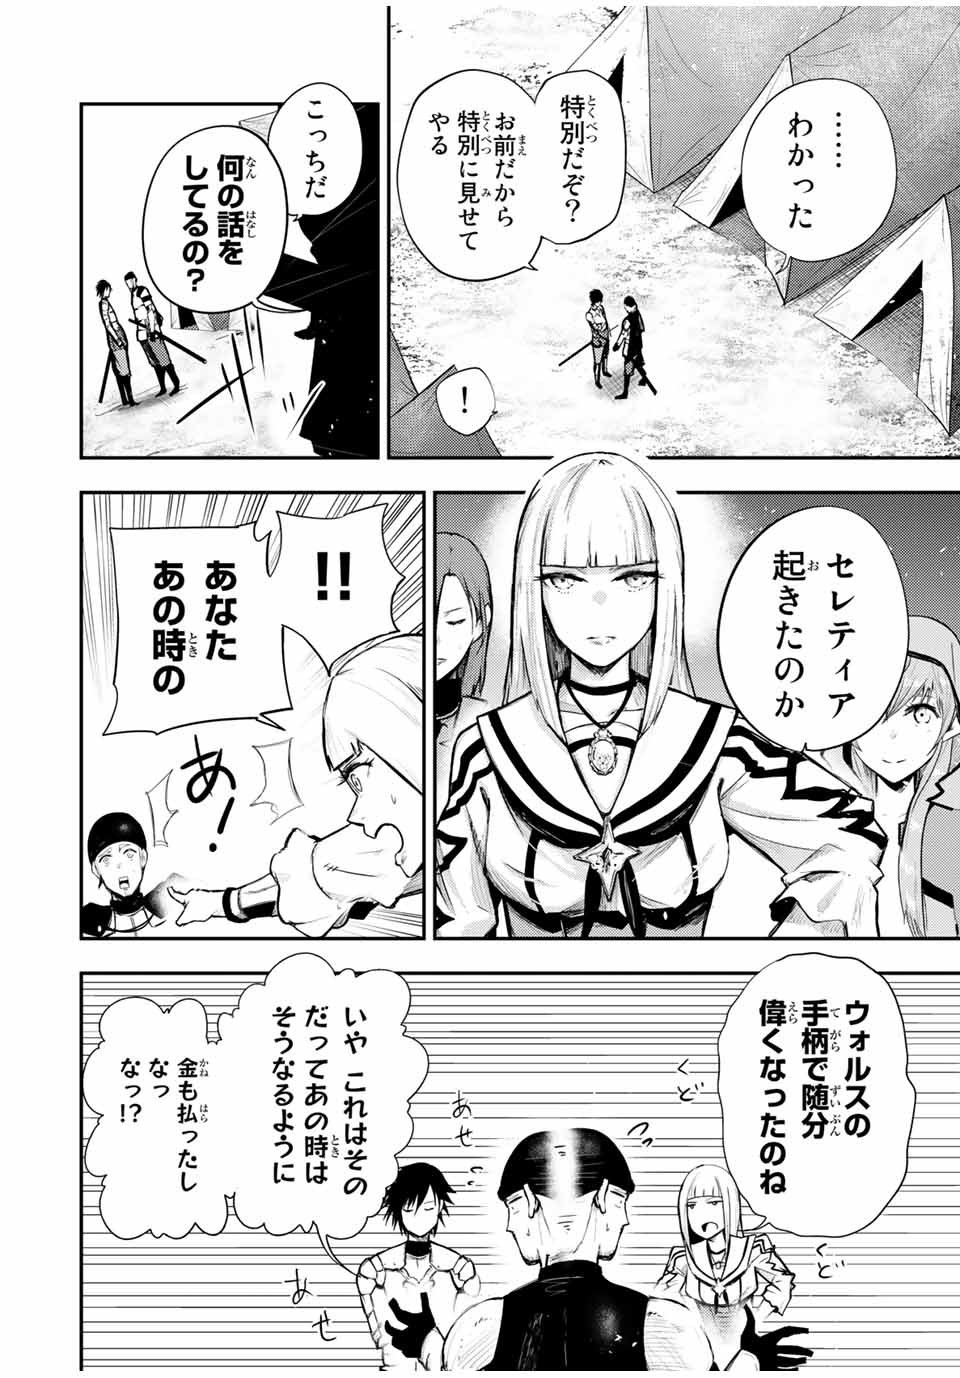 the strongest former prince-; 奴隷転生 ～その奴隷、最強の元王子につき～ 第27話 - Page 16